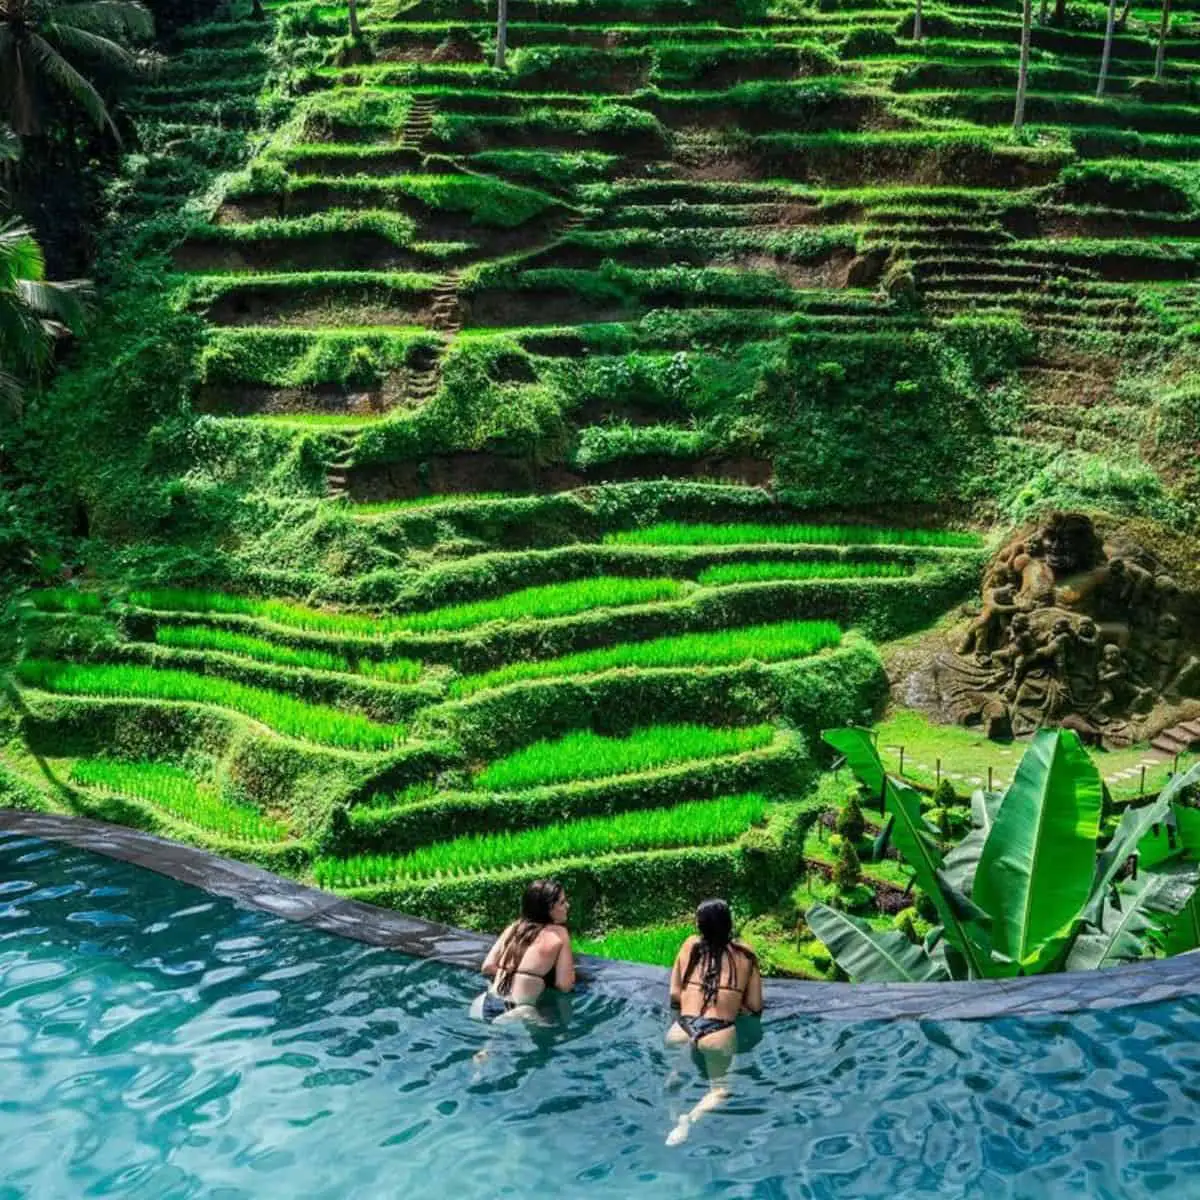 Two ladies in swimwear dipping in Cretya’s pool with rice terraces view in front